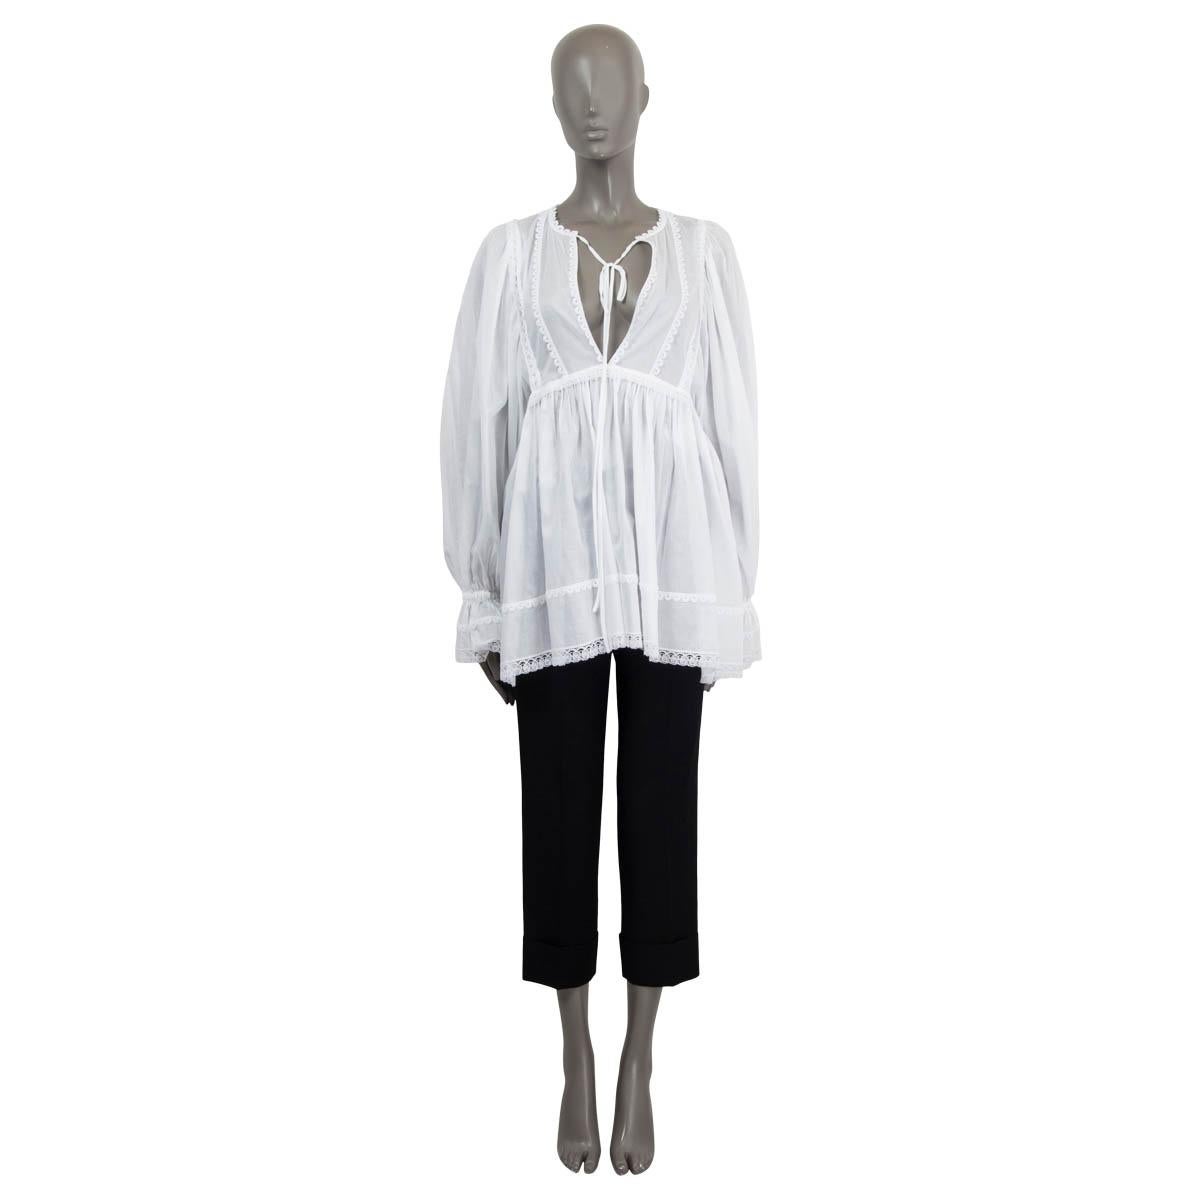 100% authentic Dolce & Gabbana babydoll tunic blouse in white cotton-blend voile (missing tag) with lace-trim and gathered accents on cuffs, chest and trim. Opens with a zipper on the back. Unlined. Has been worn and is in excellent condition.